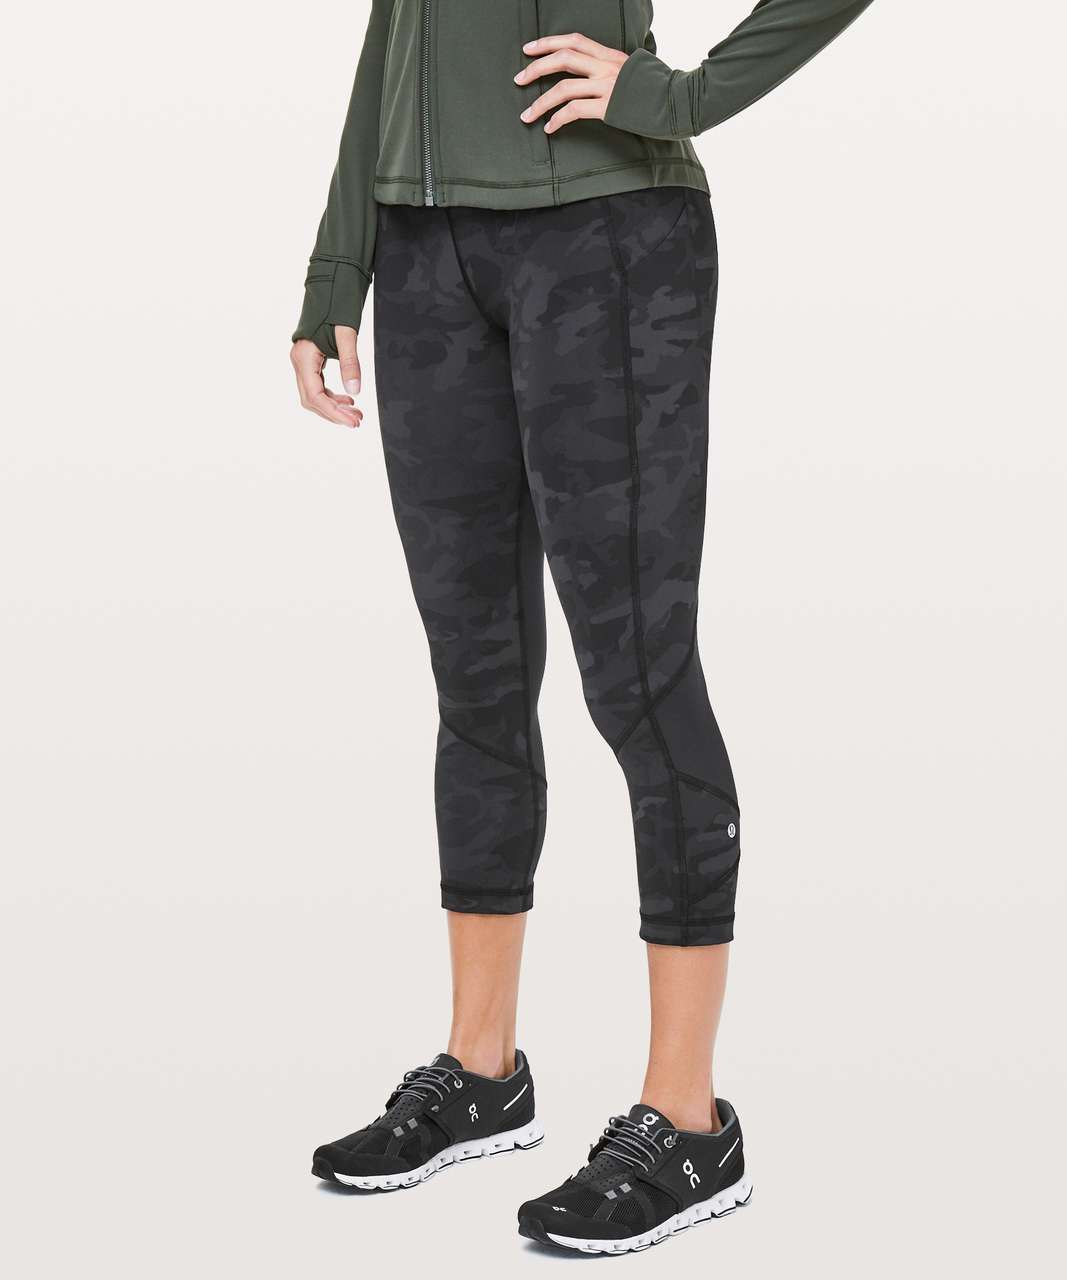 Lululemon Pace Rival Crop *22" - Incognito Camo Multi Grey / Black (First Release)